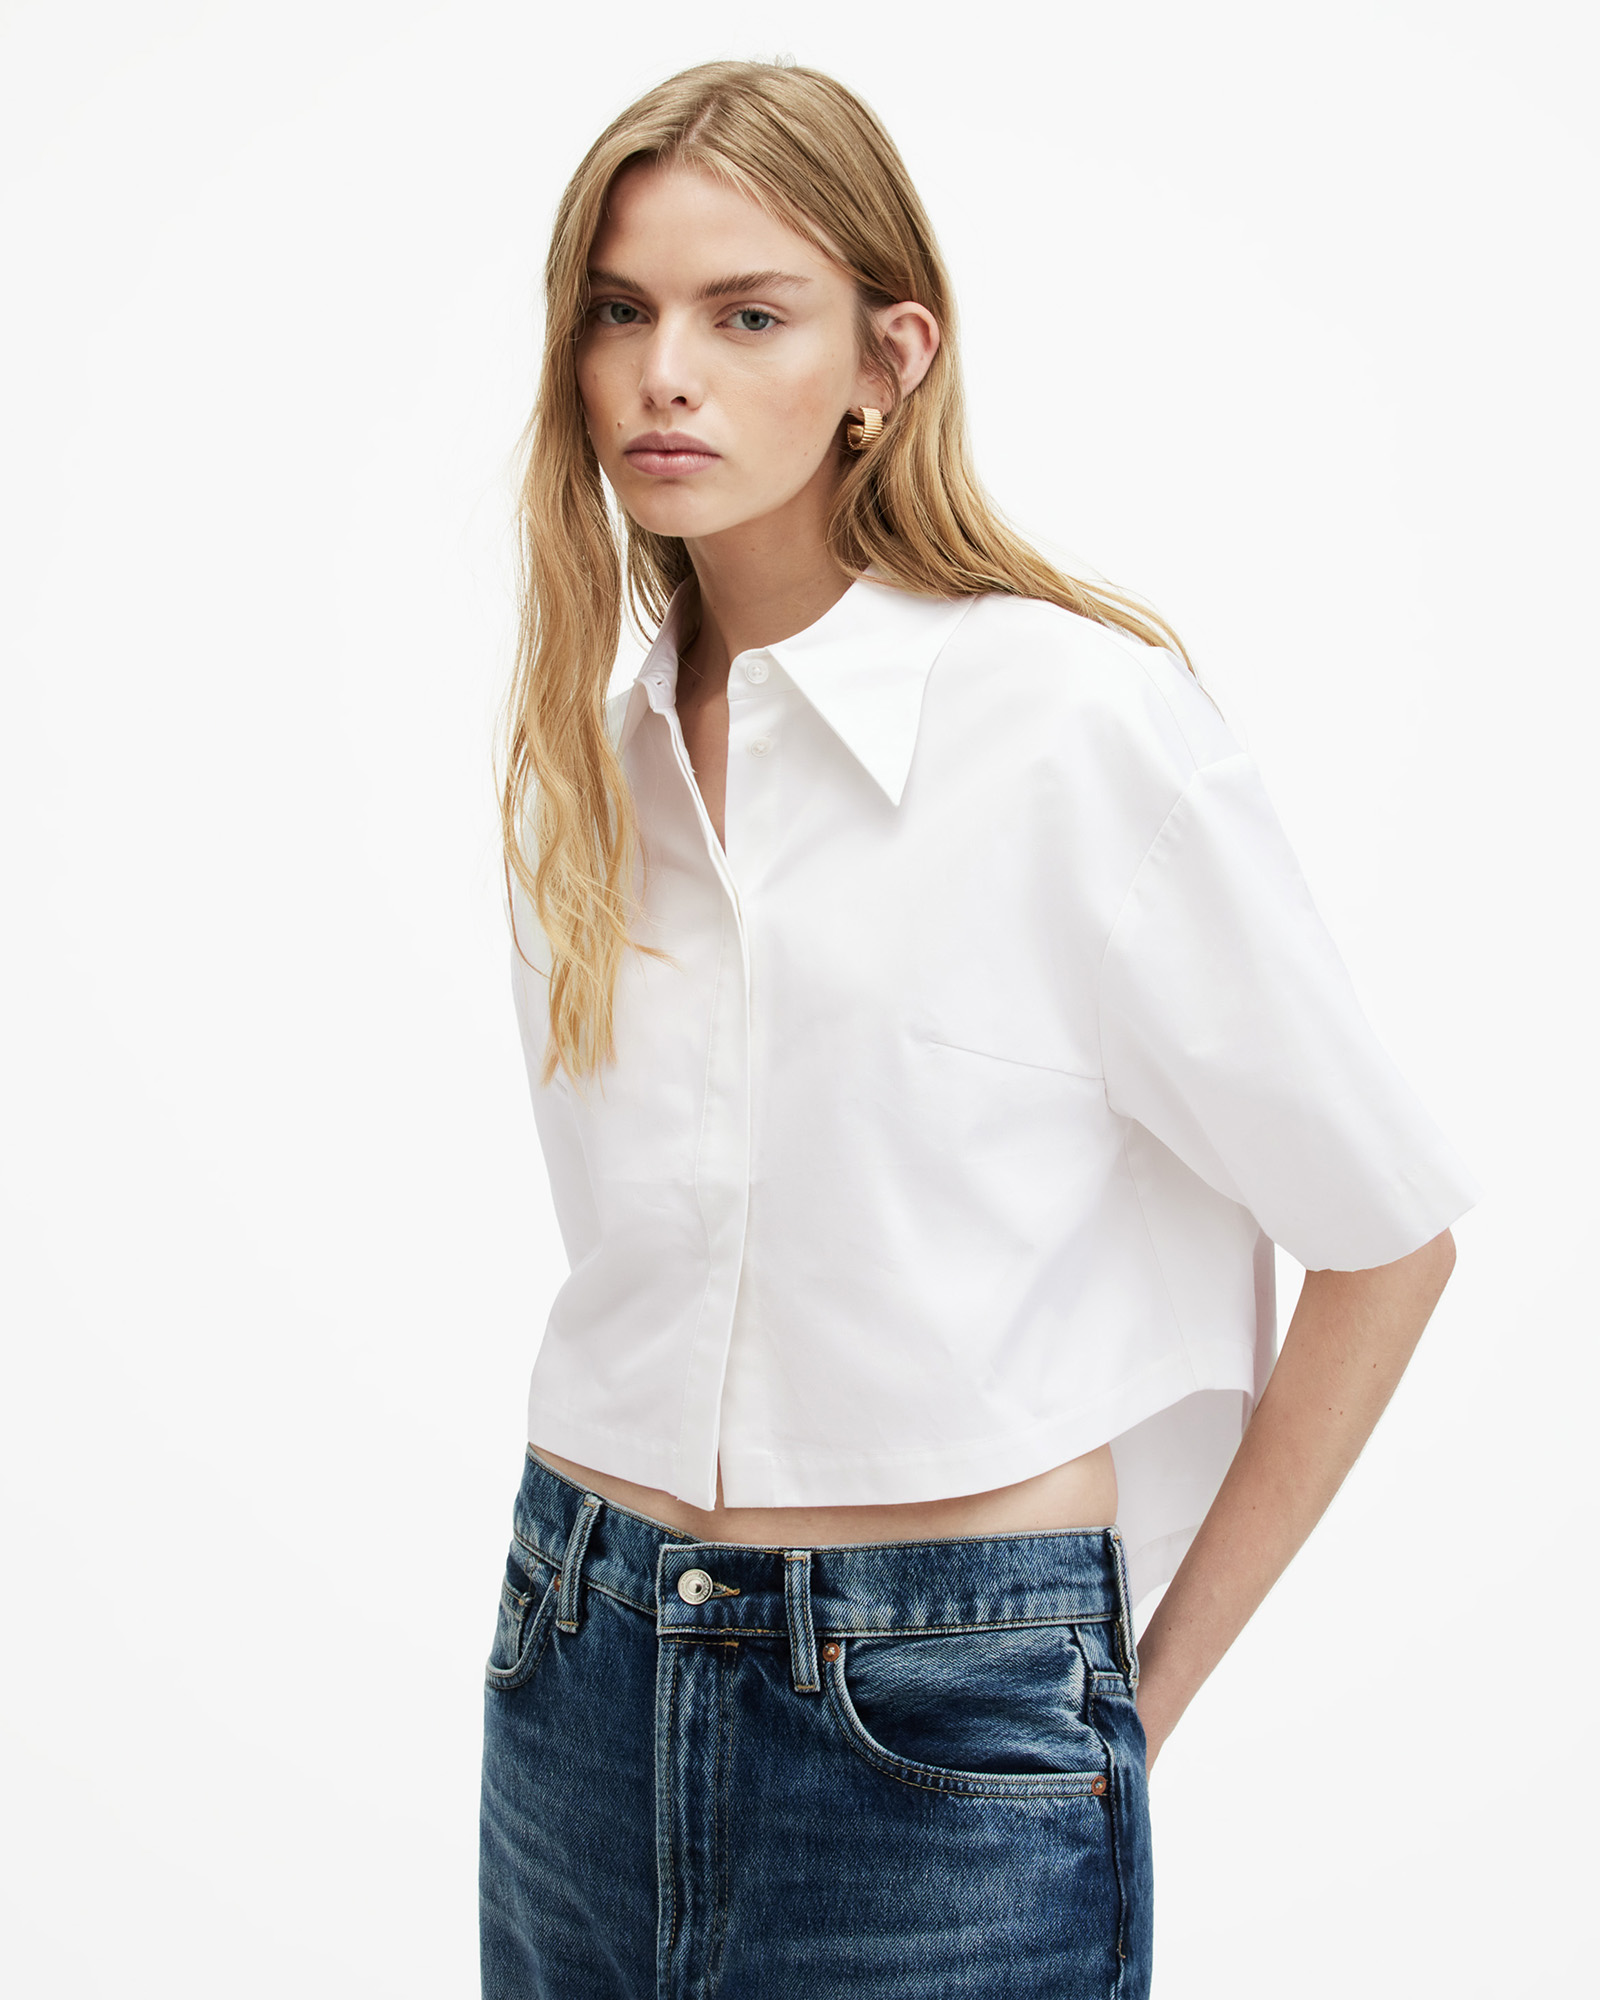 AllSaints Joanna Relaxed Fit Cropped Shirt,, White